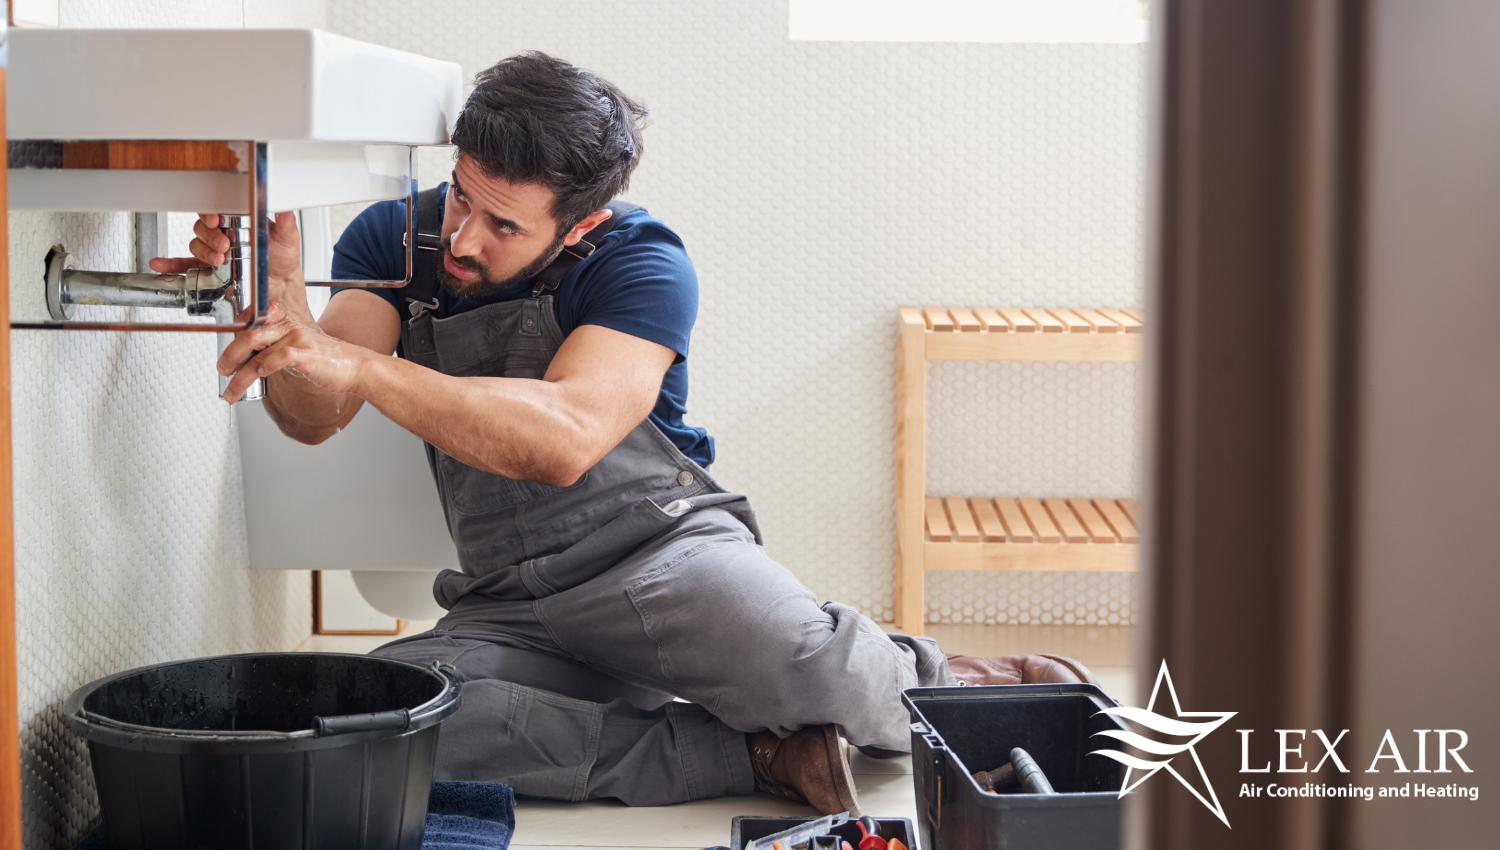 DIY vs. Professional Plumbing Repairs When to Call a Professional